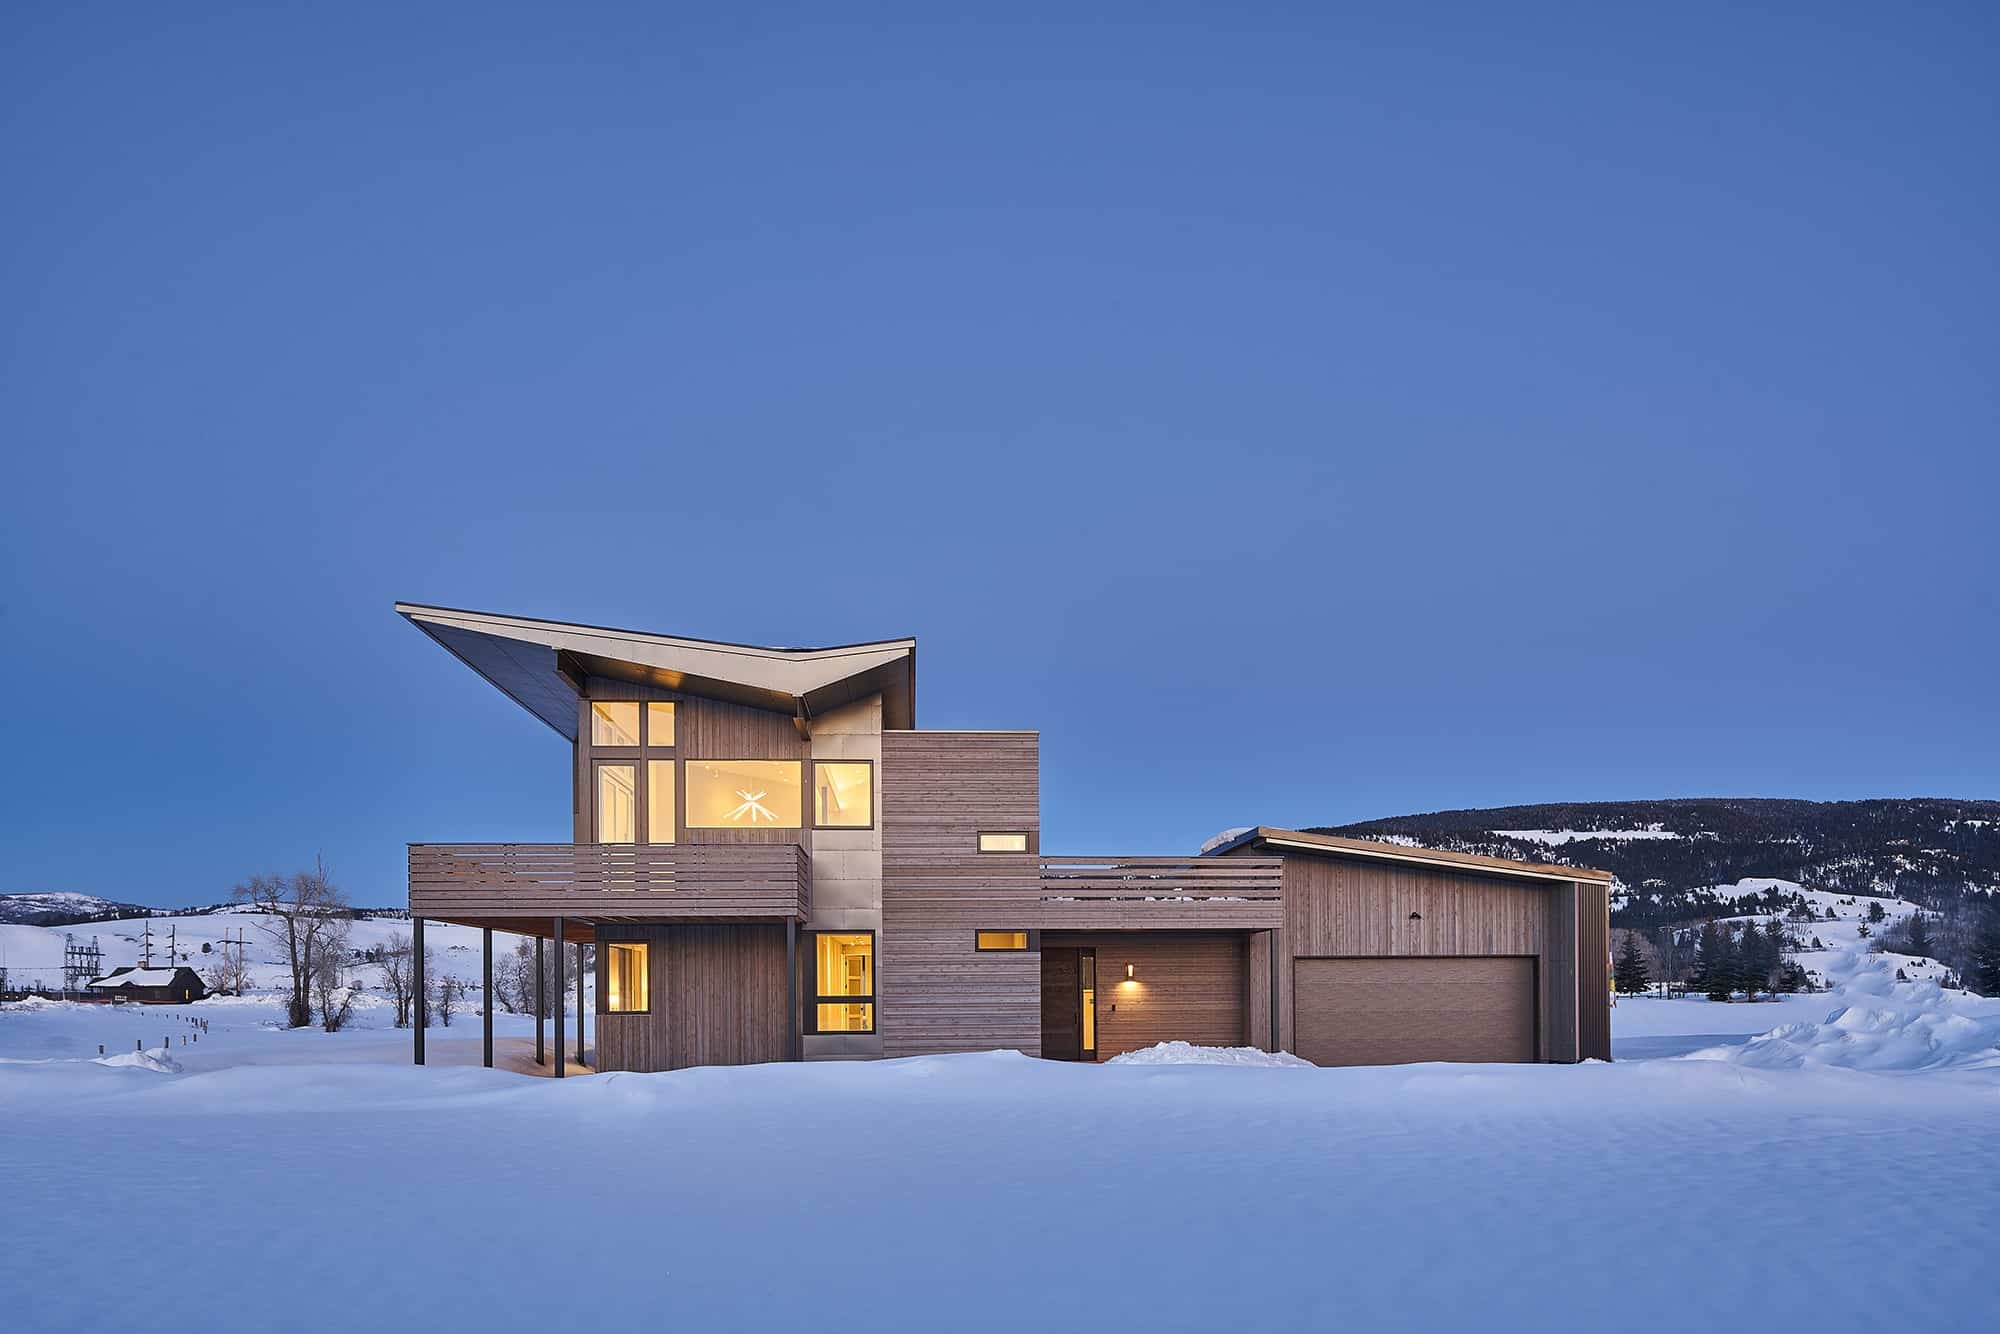 farmer-payne-architects-architects-and-designers-sun-valley-image-3